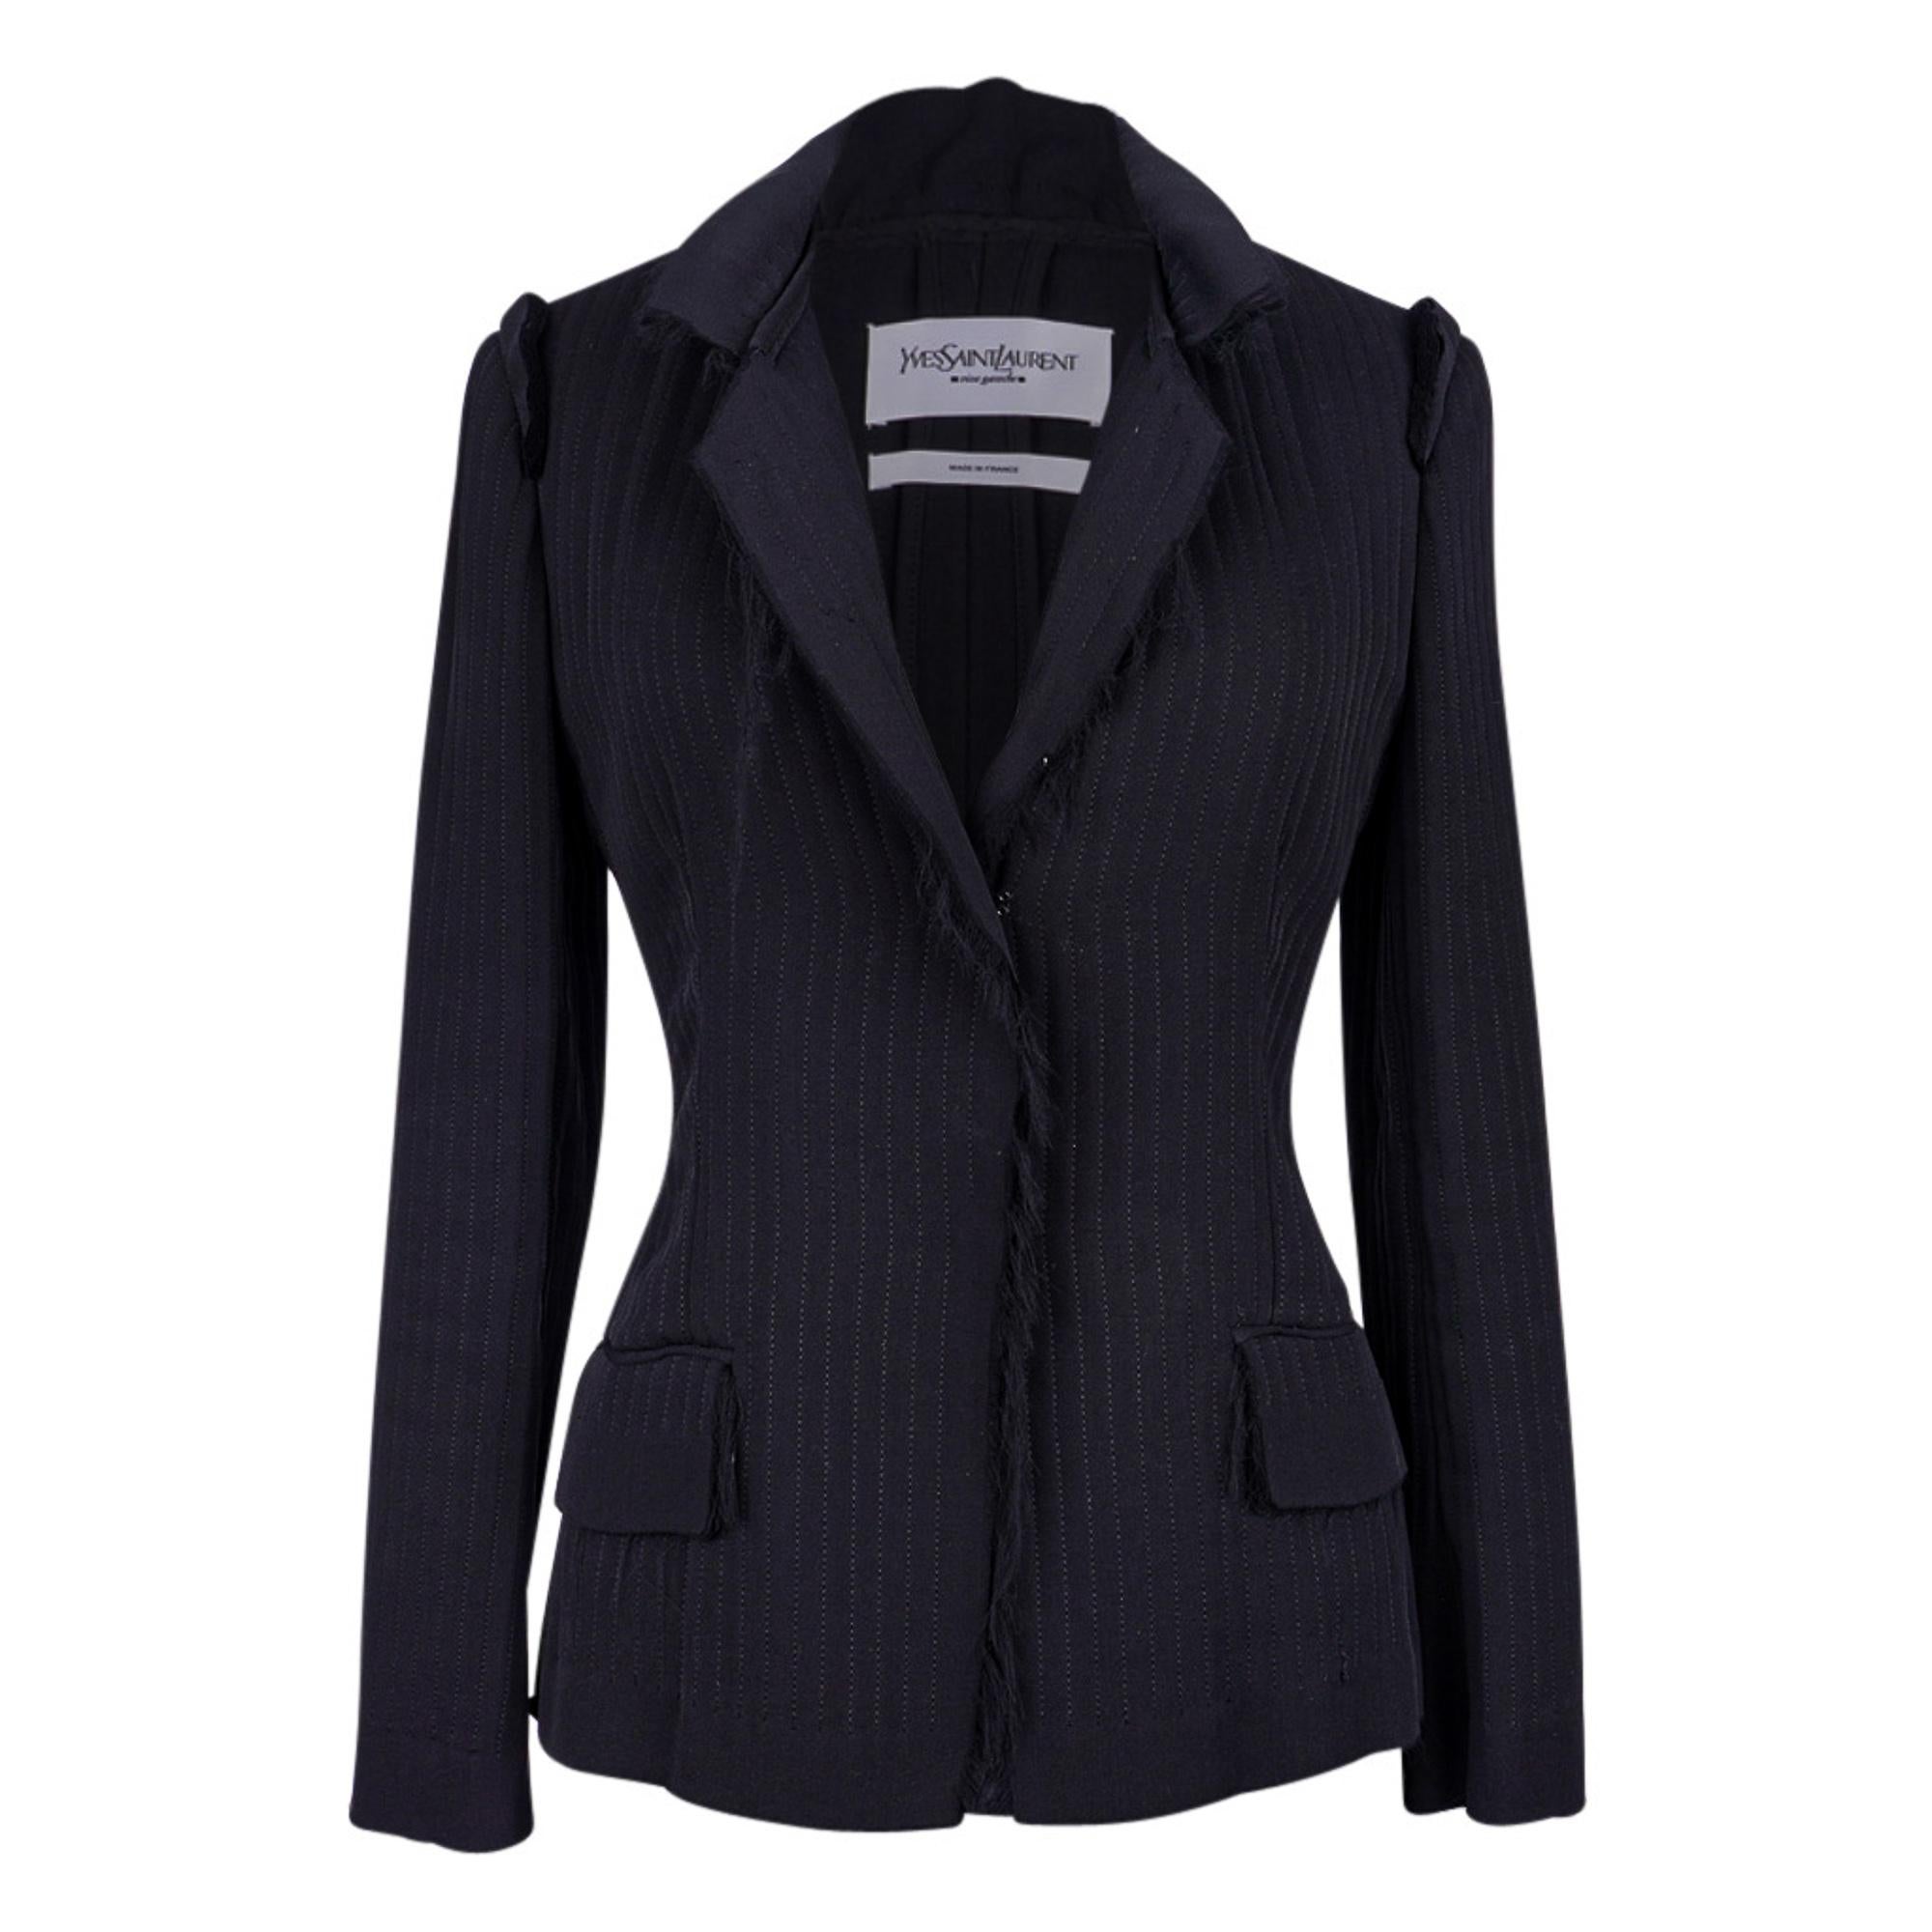 Yves Saint Laurent Jacket Exquisite Tom Ford Creation in Layers 36 at ...